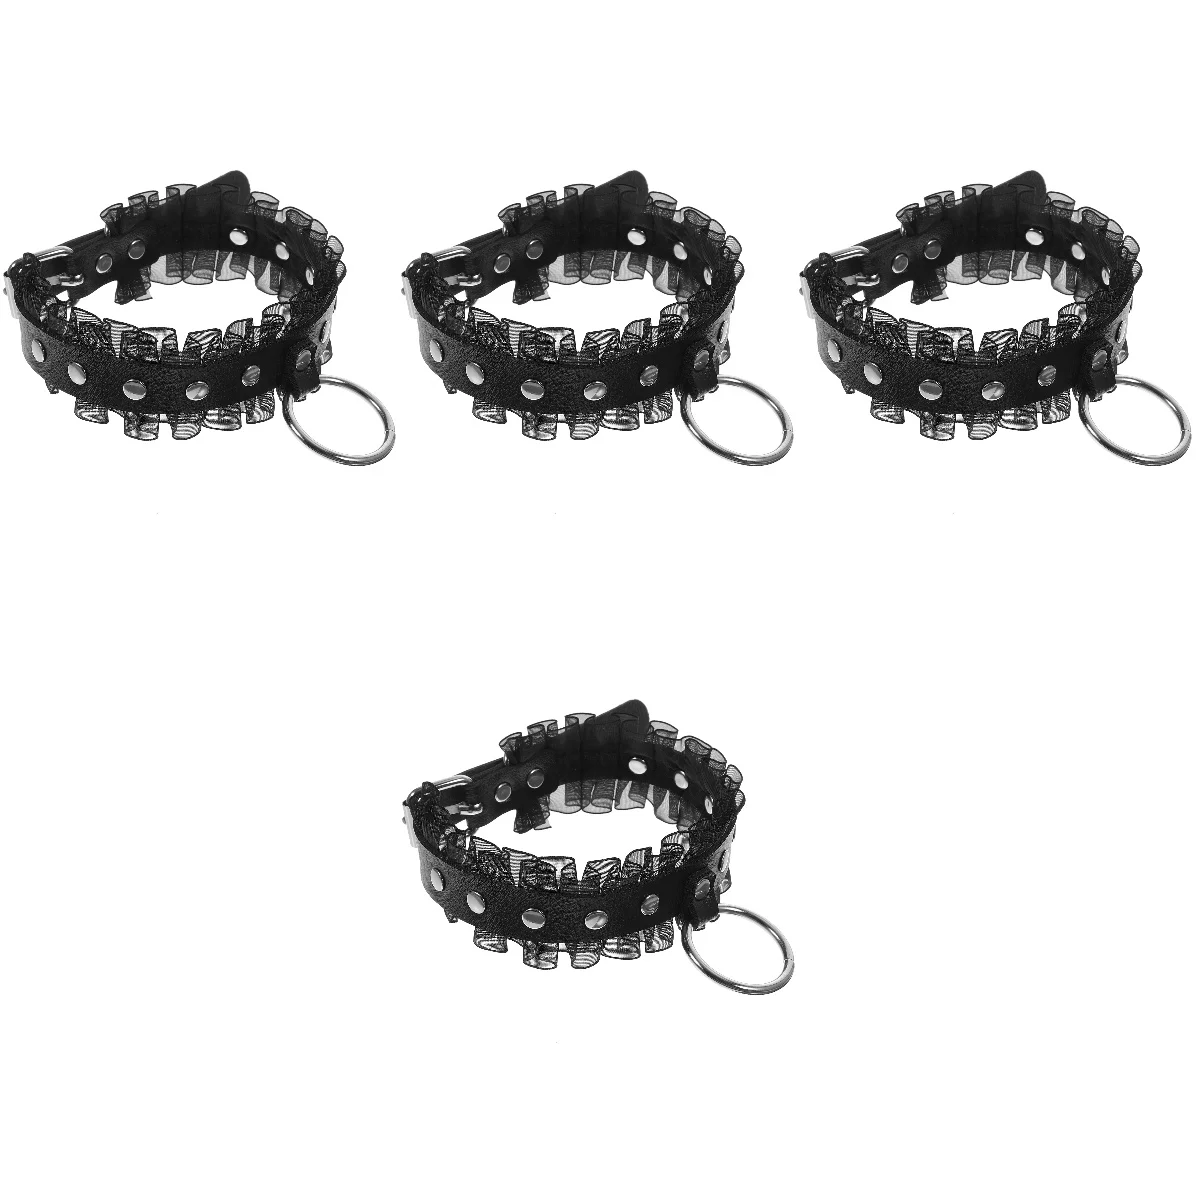 

4 Pieces Collar 90s Choker Necklace Goth Rivets Black String Metal Fittings Chokers Girls Women's